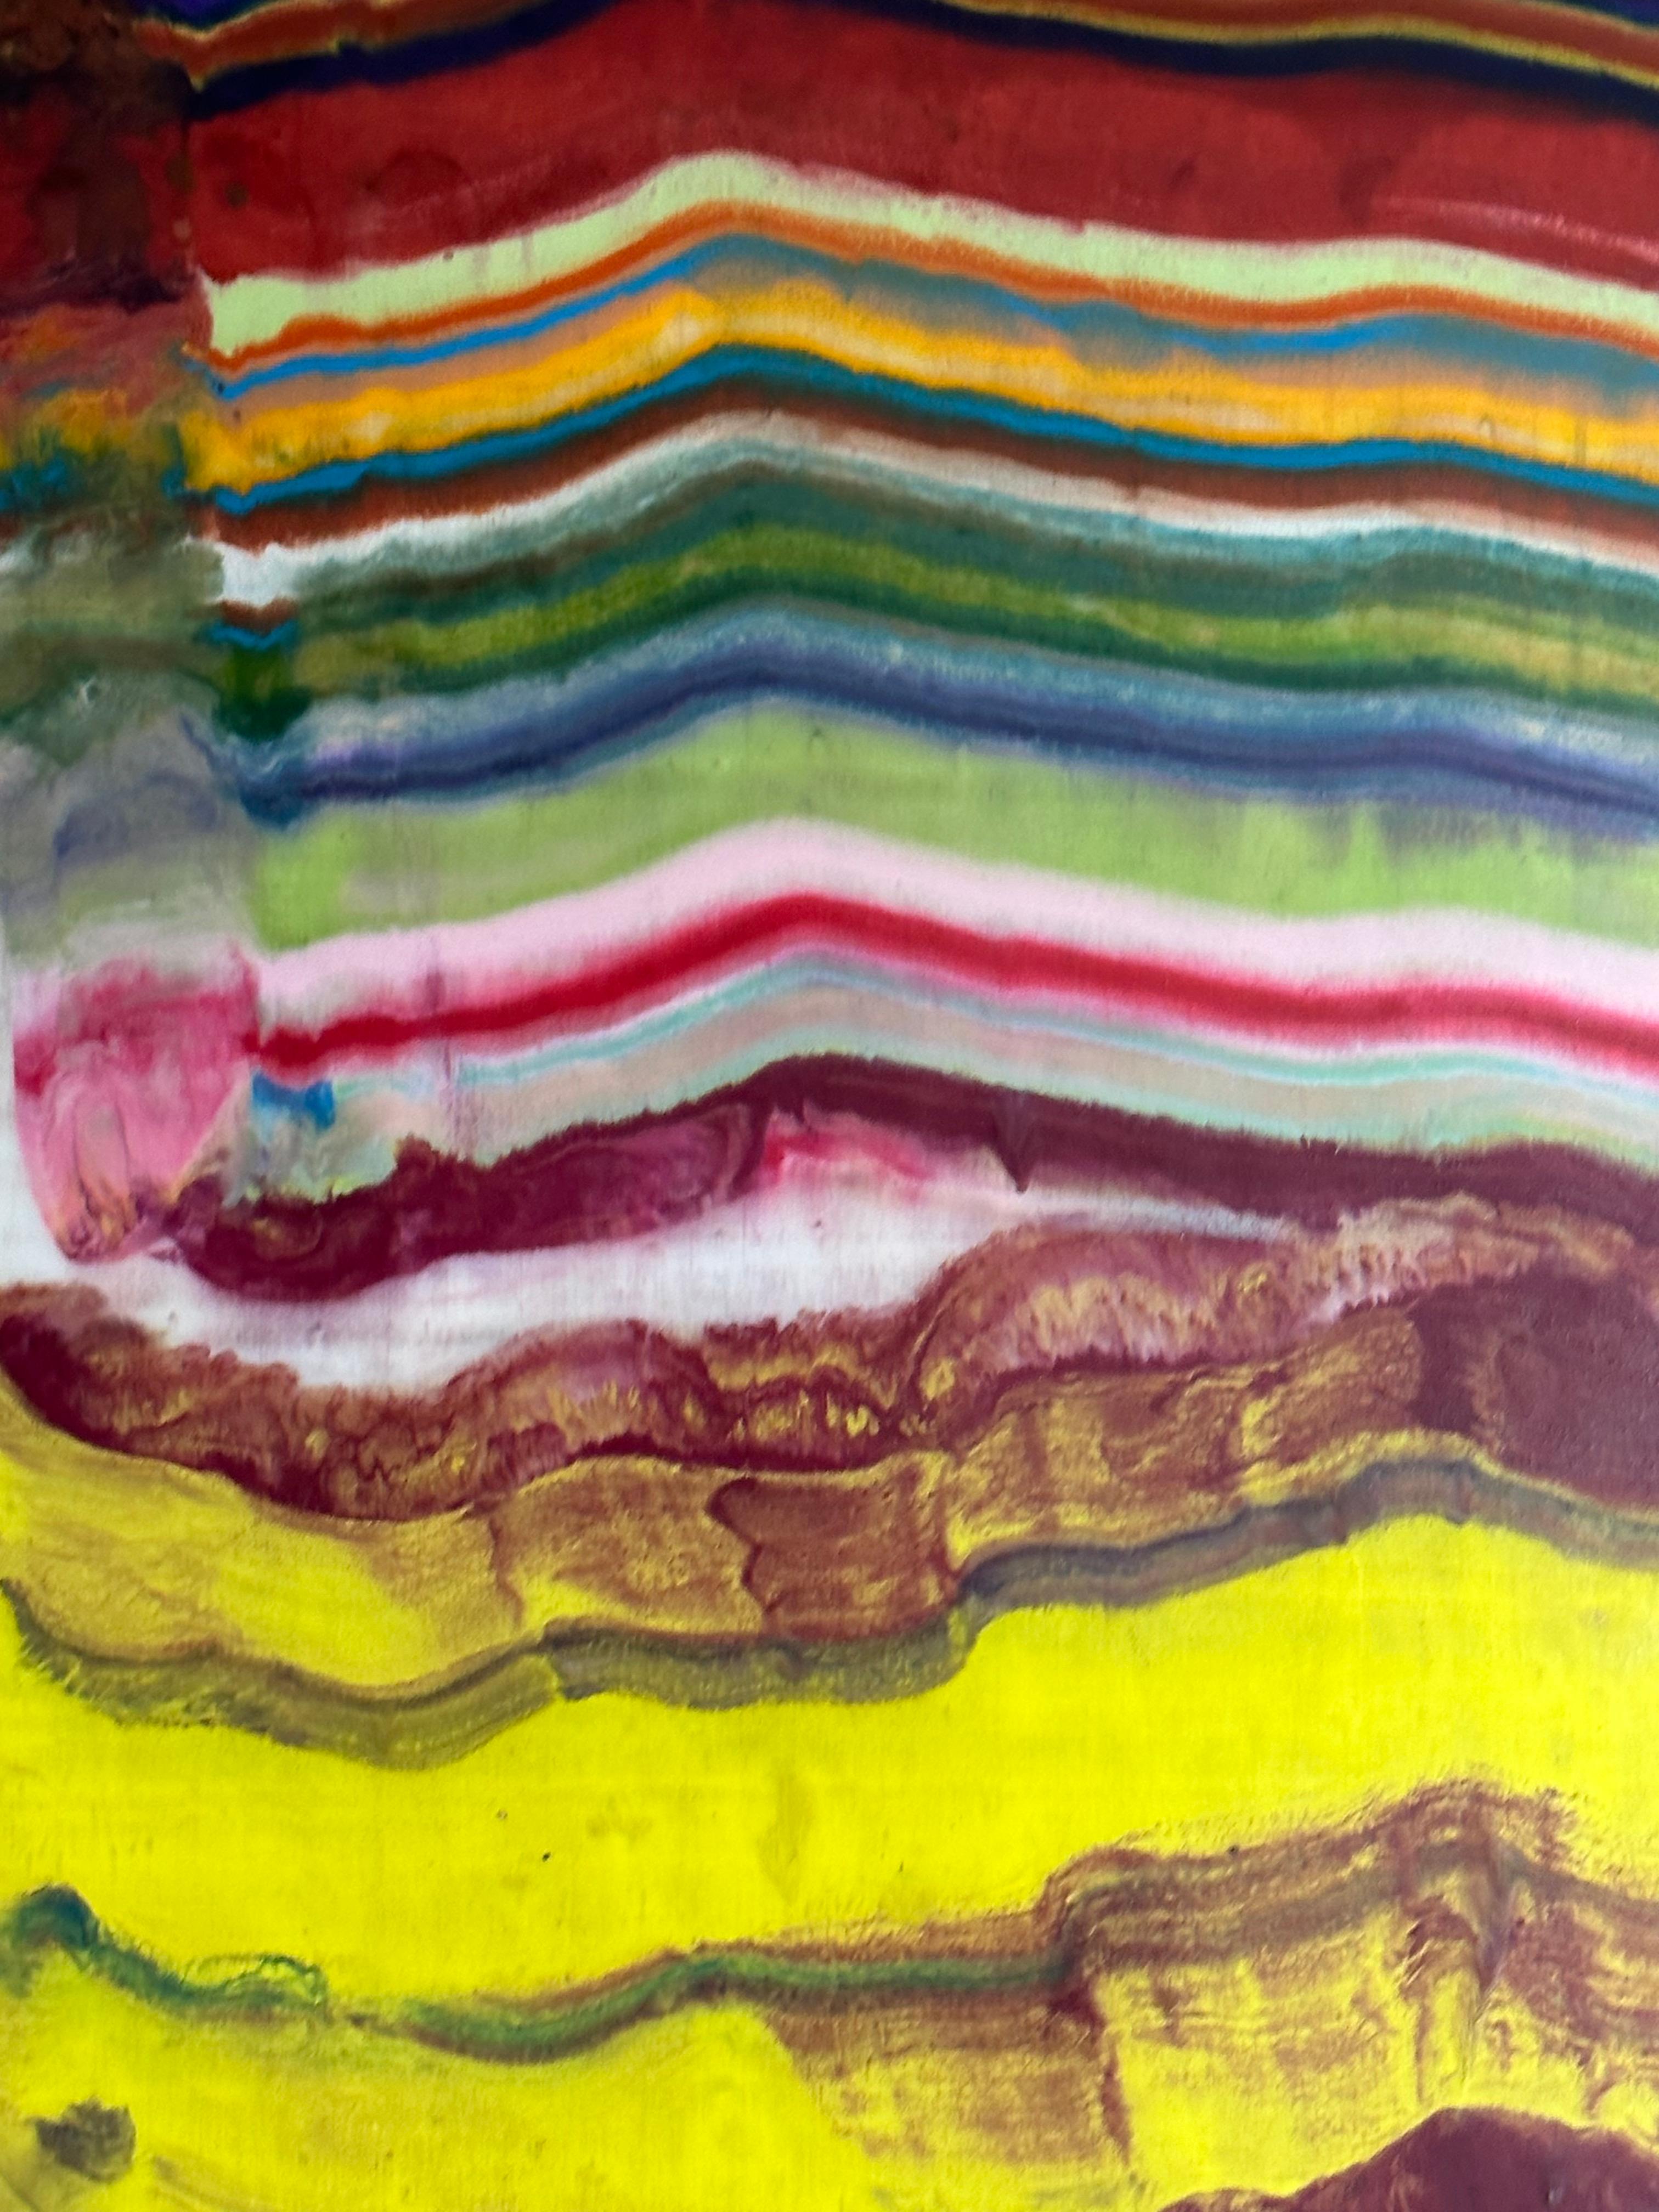 Laura Moriarty's Ex Uno Plures 7 is a multicolored encaustic monotype on kozo paper. Layers of pigmented beeswax on lightweight paper create an undulating composition suggesting layers of the earth's crust and geological formations depicted in pink,